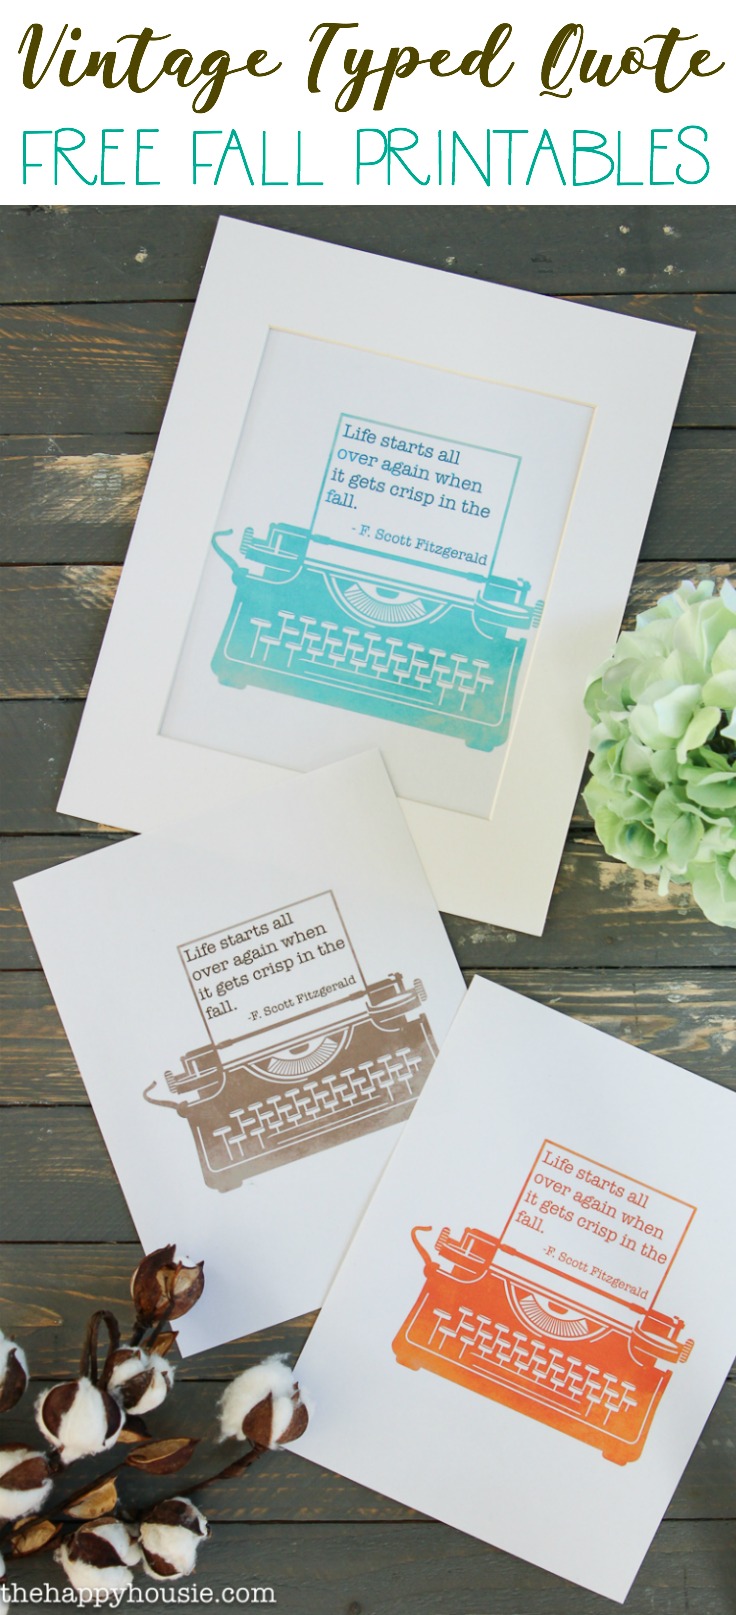 Vintage Typed Quote Free Fall Printables poster.